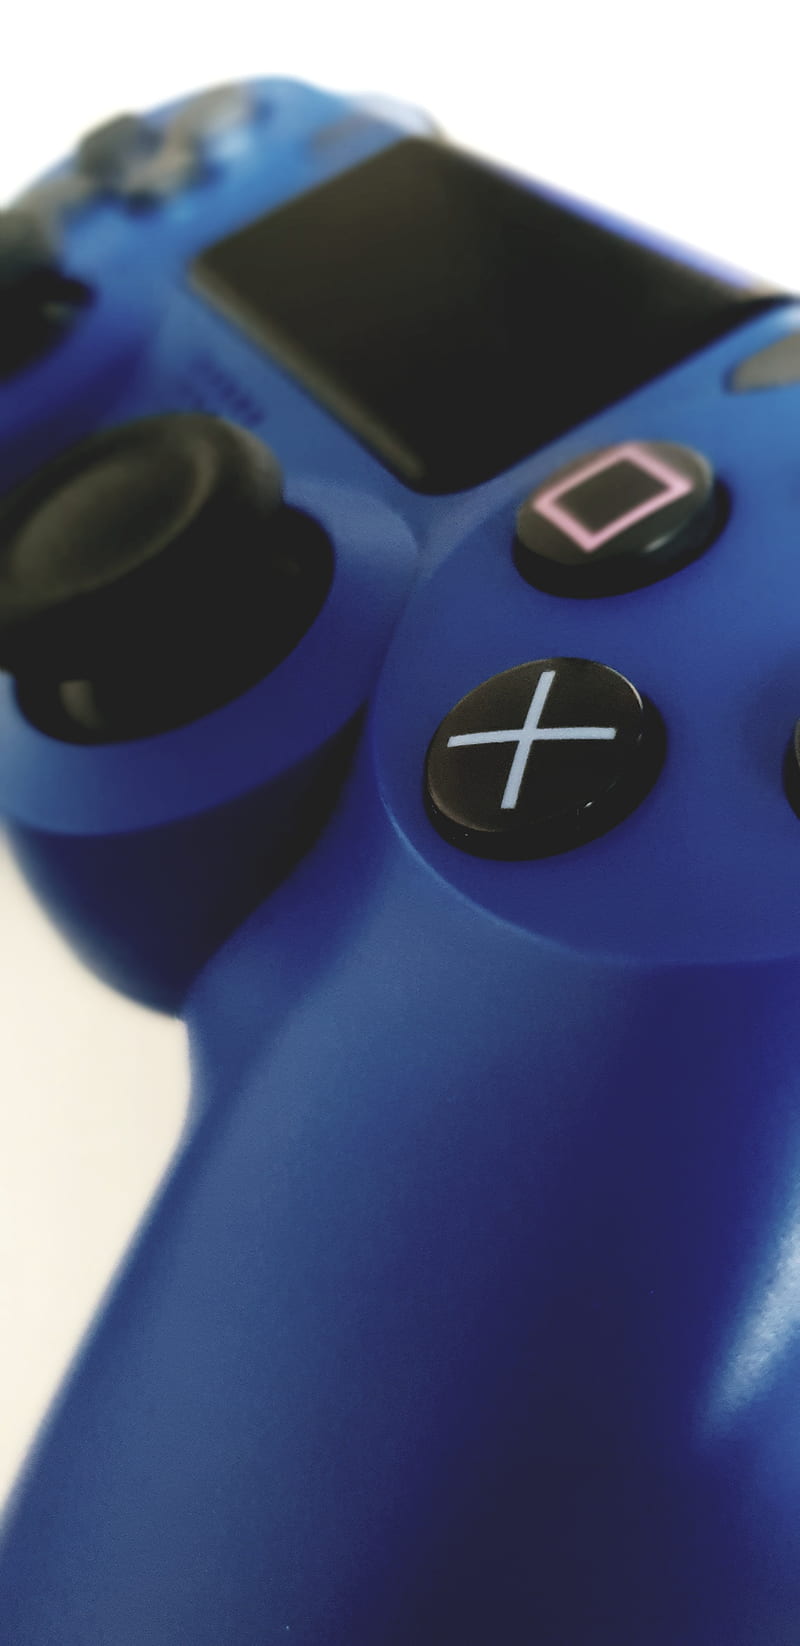 PS4 Controller, control, game, games, gaming, playstation, HD phone wallpaper